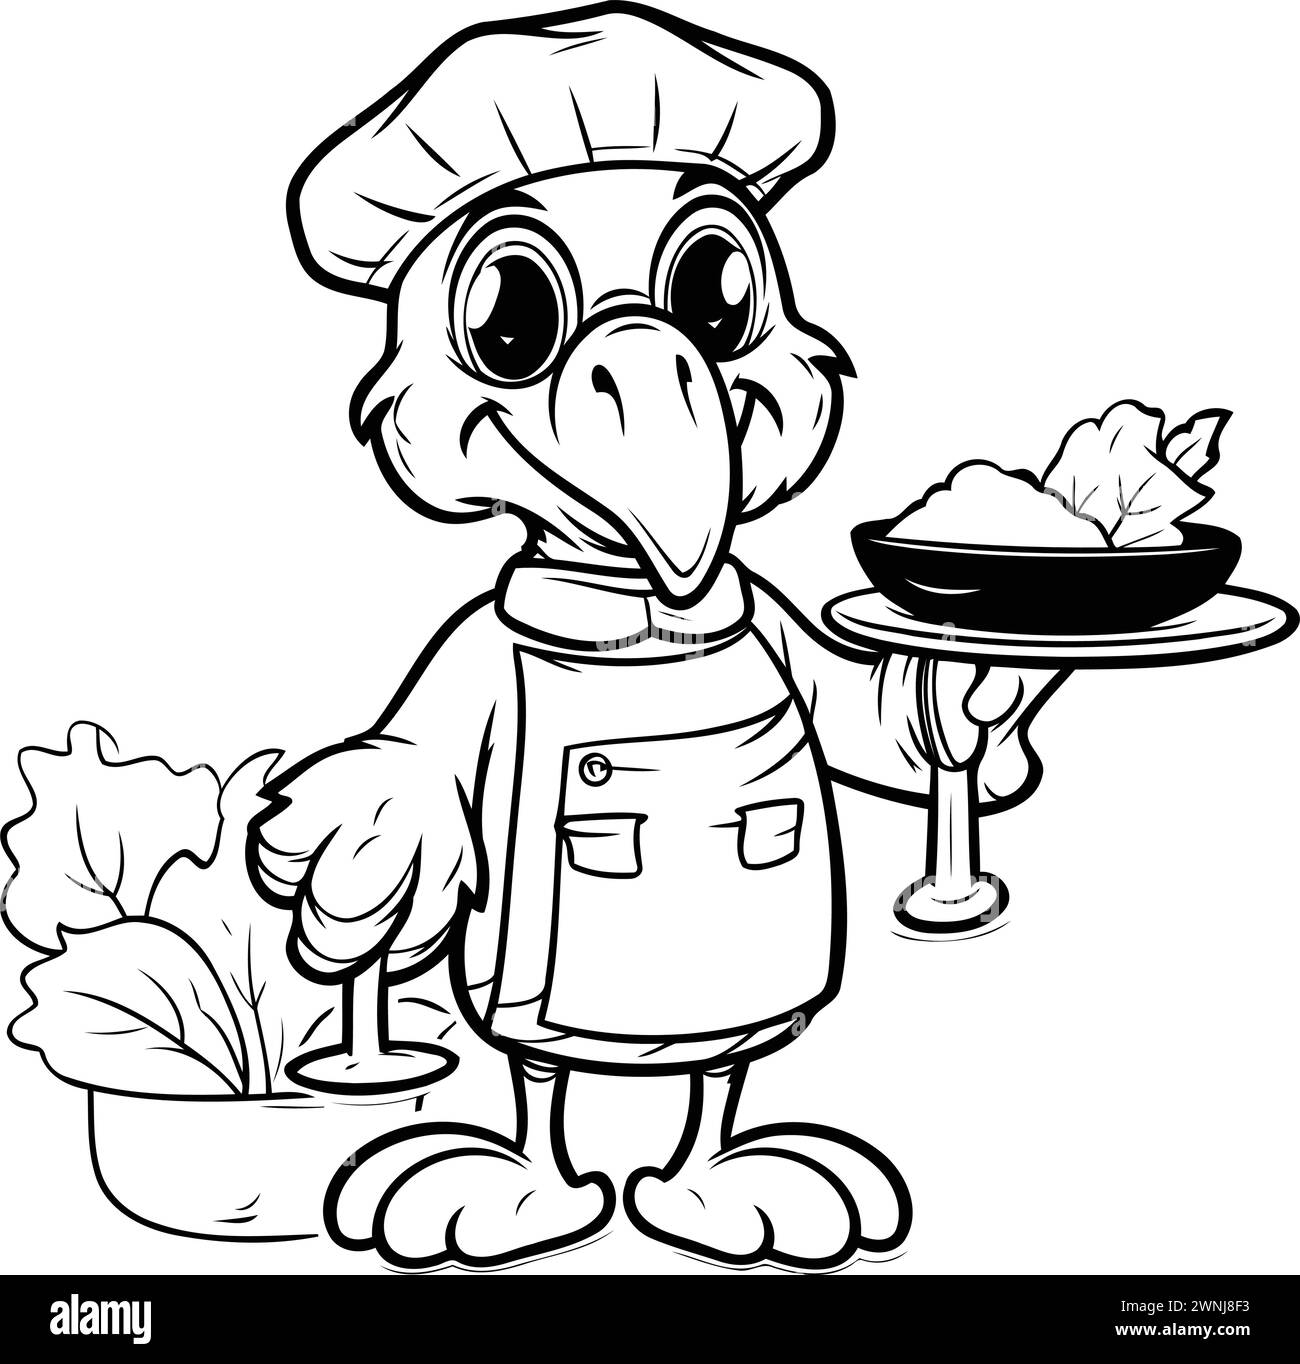 Black and White Cartoon Illustration of Cute Bird Chef Character for Coloring Book Stock Vector